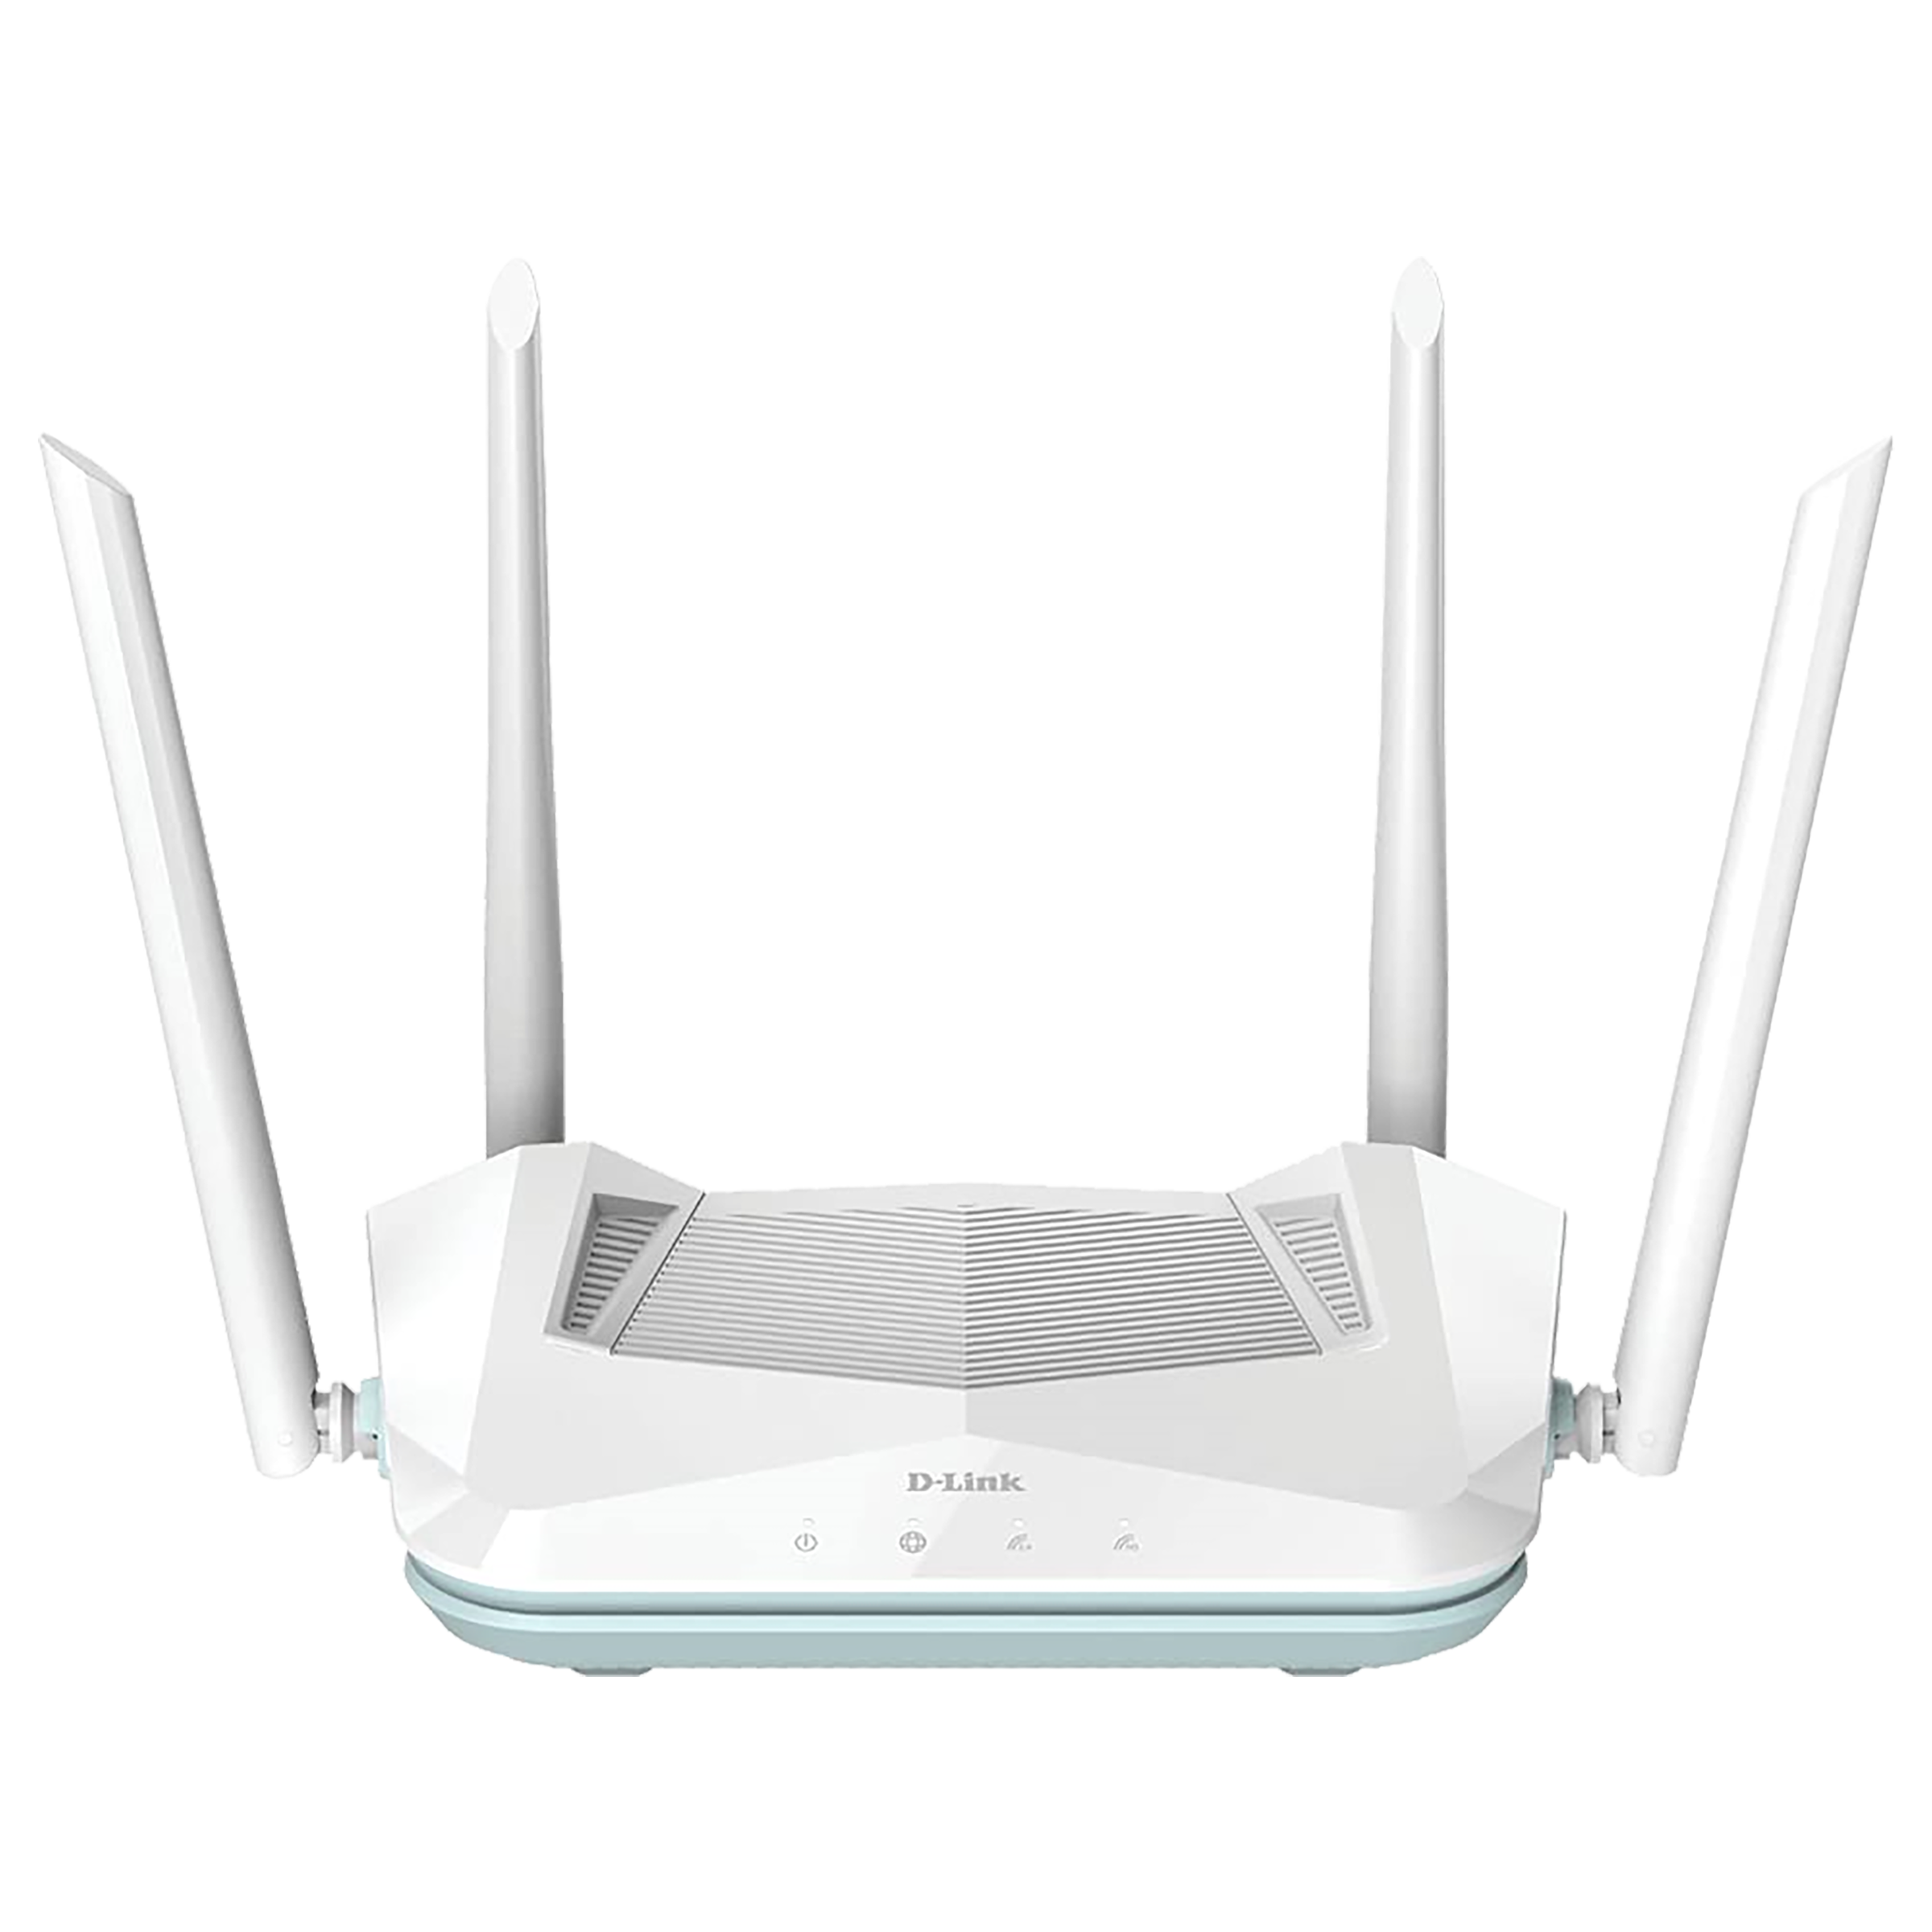 D-Link AX1500 Dual Band 1201 Mbps WiFi Router (4 Antennas, 3 LAN Ports, Google Assistant And Alexa Supported, R15, White)_1